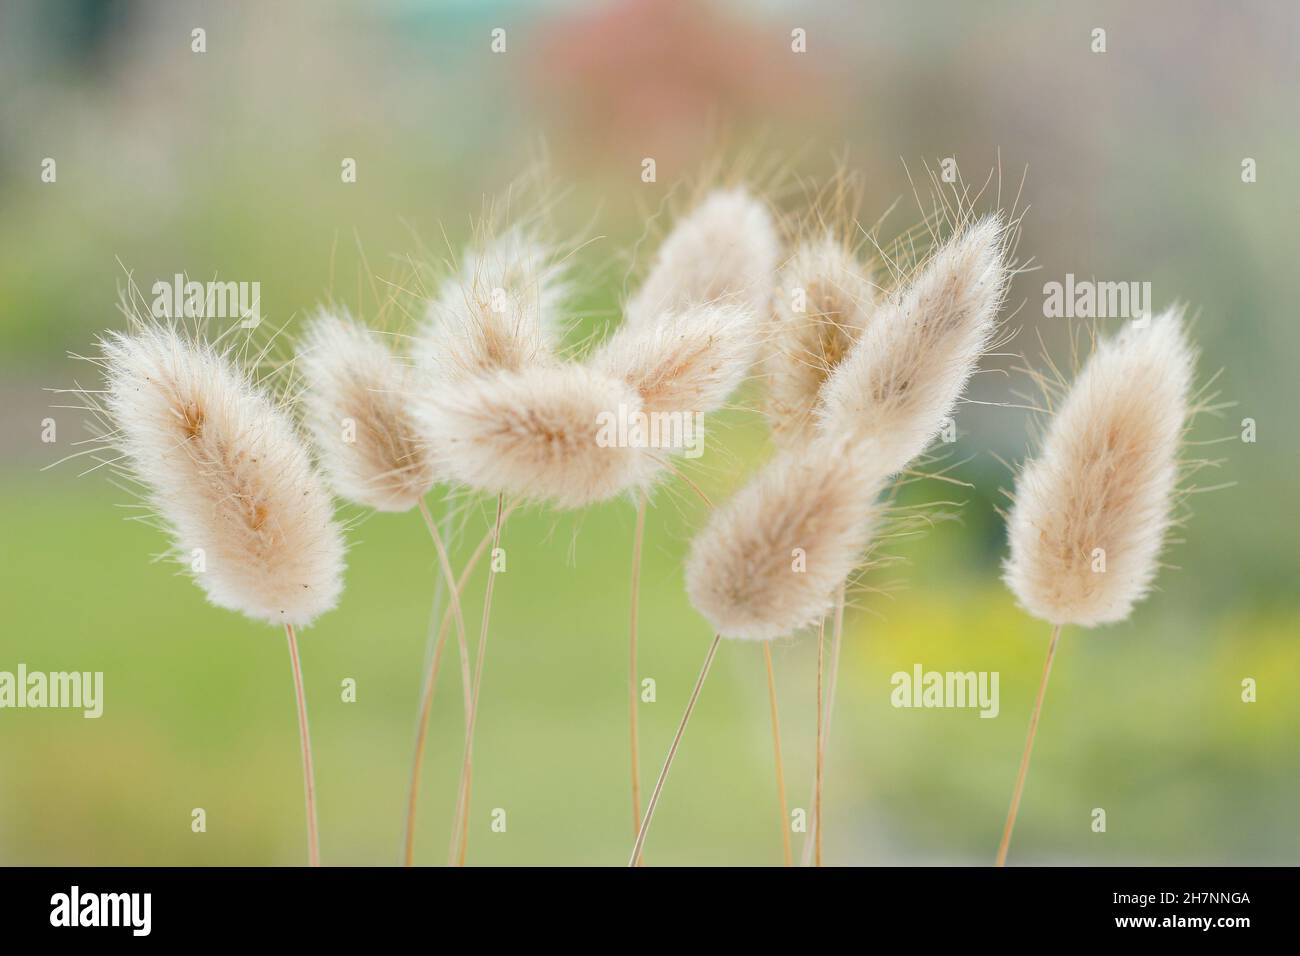 Lagurus ovatus. Decorative dried tufts of Bunny's tail grass. Also called Hare's tail grass Stock Photo